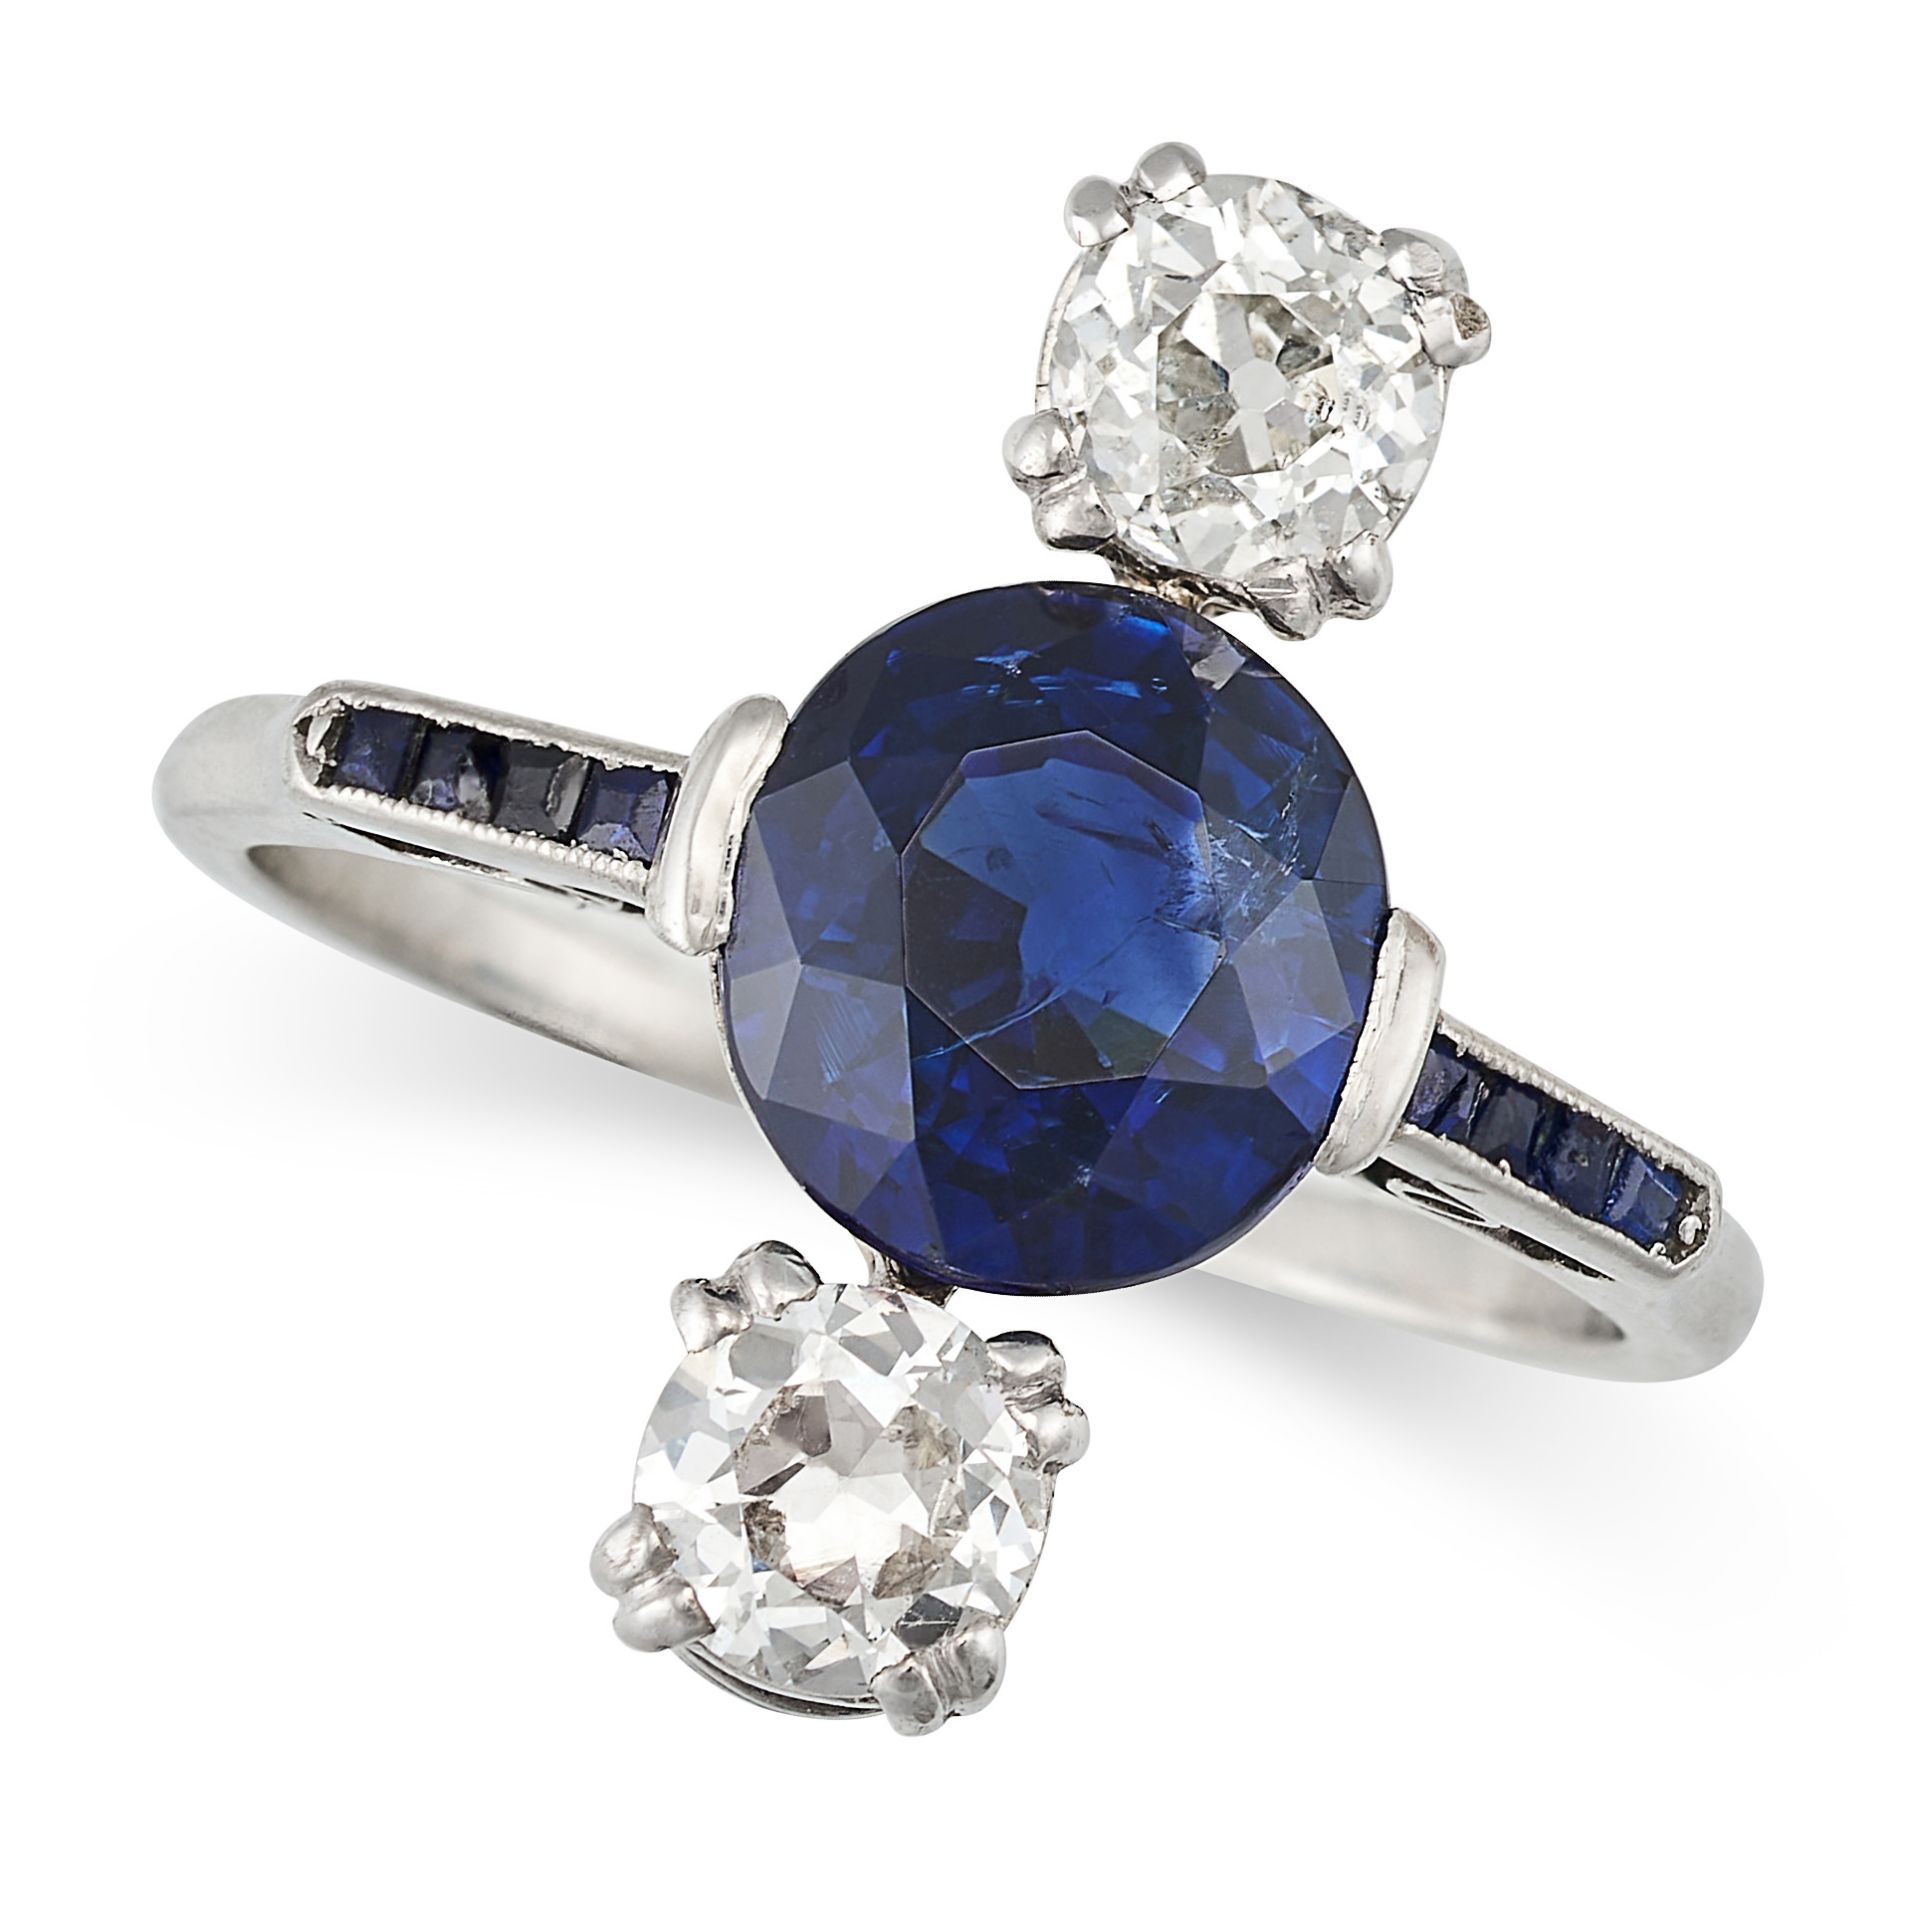 A SAPPHIRE AND DIAMOND DRESS RING set with a round cut sapphire of approximately 2.48 carats betw...